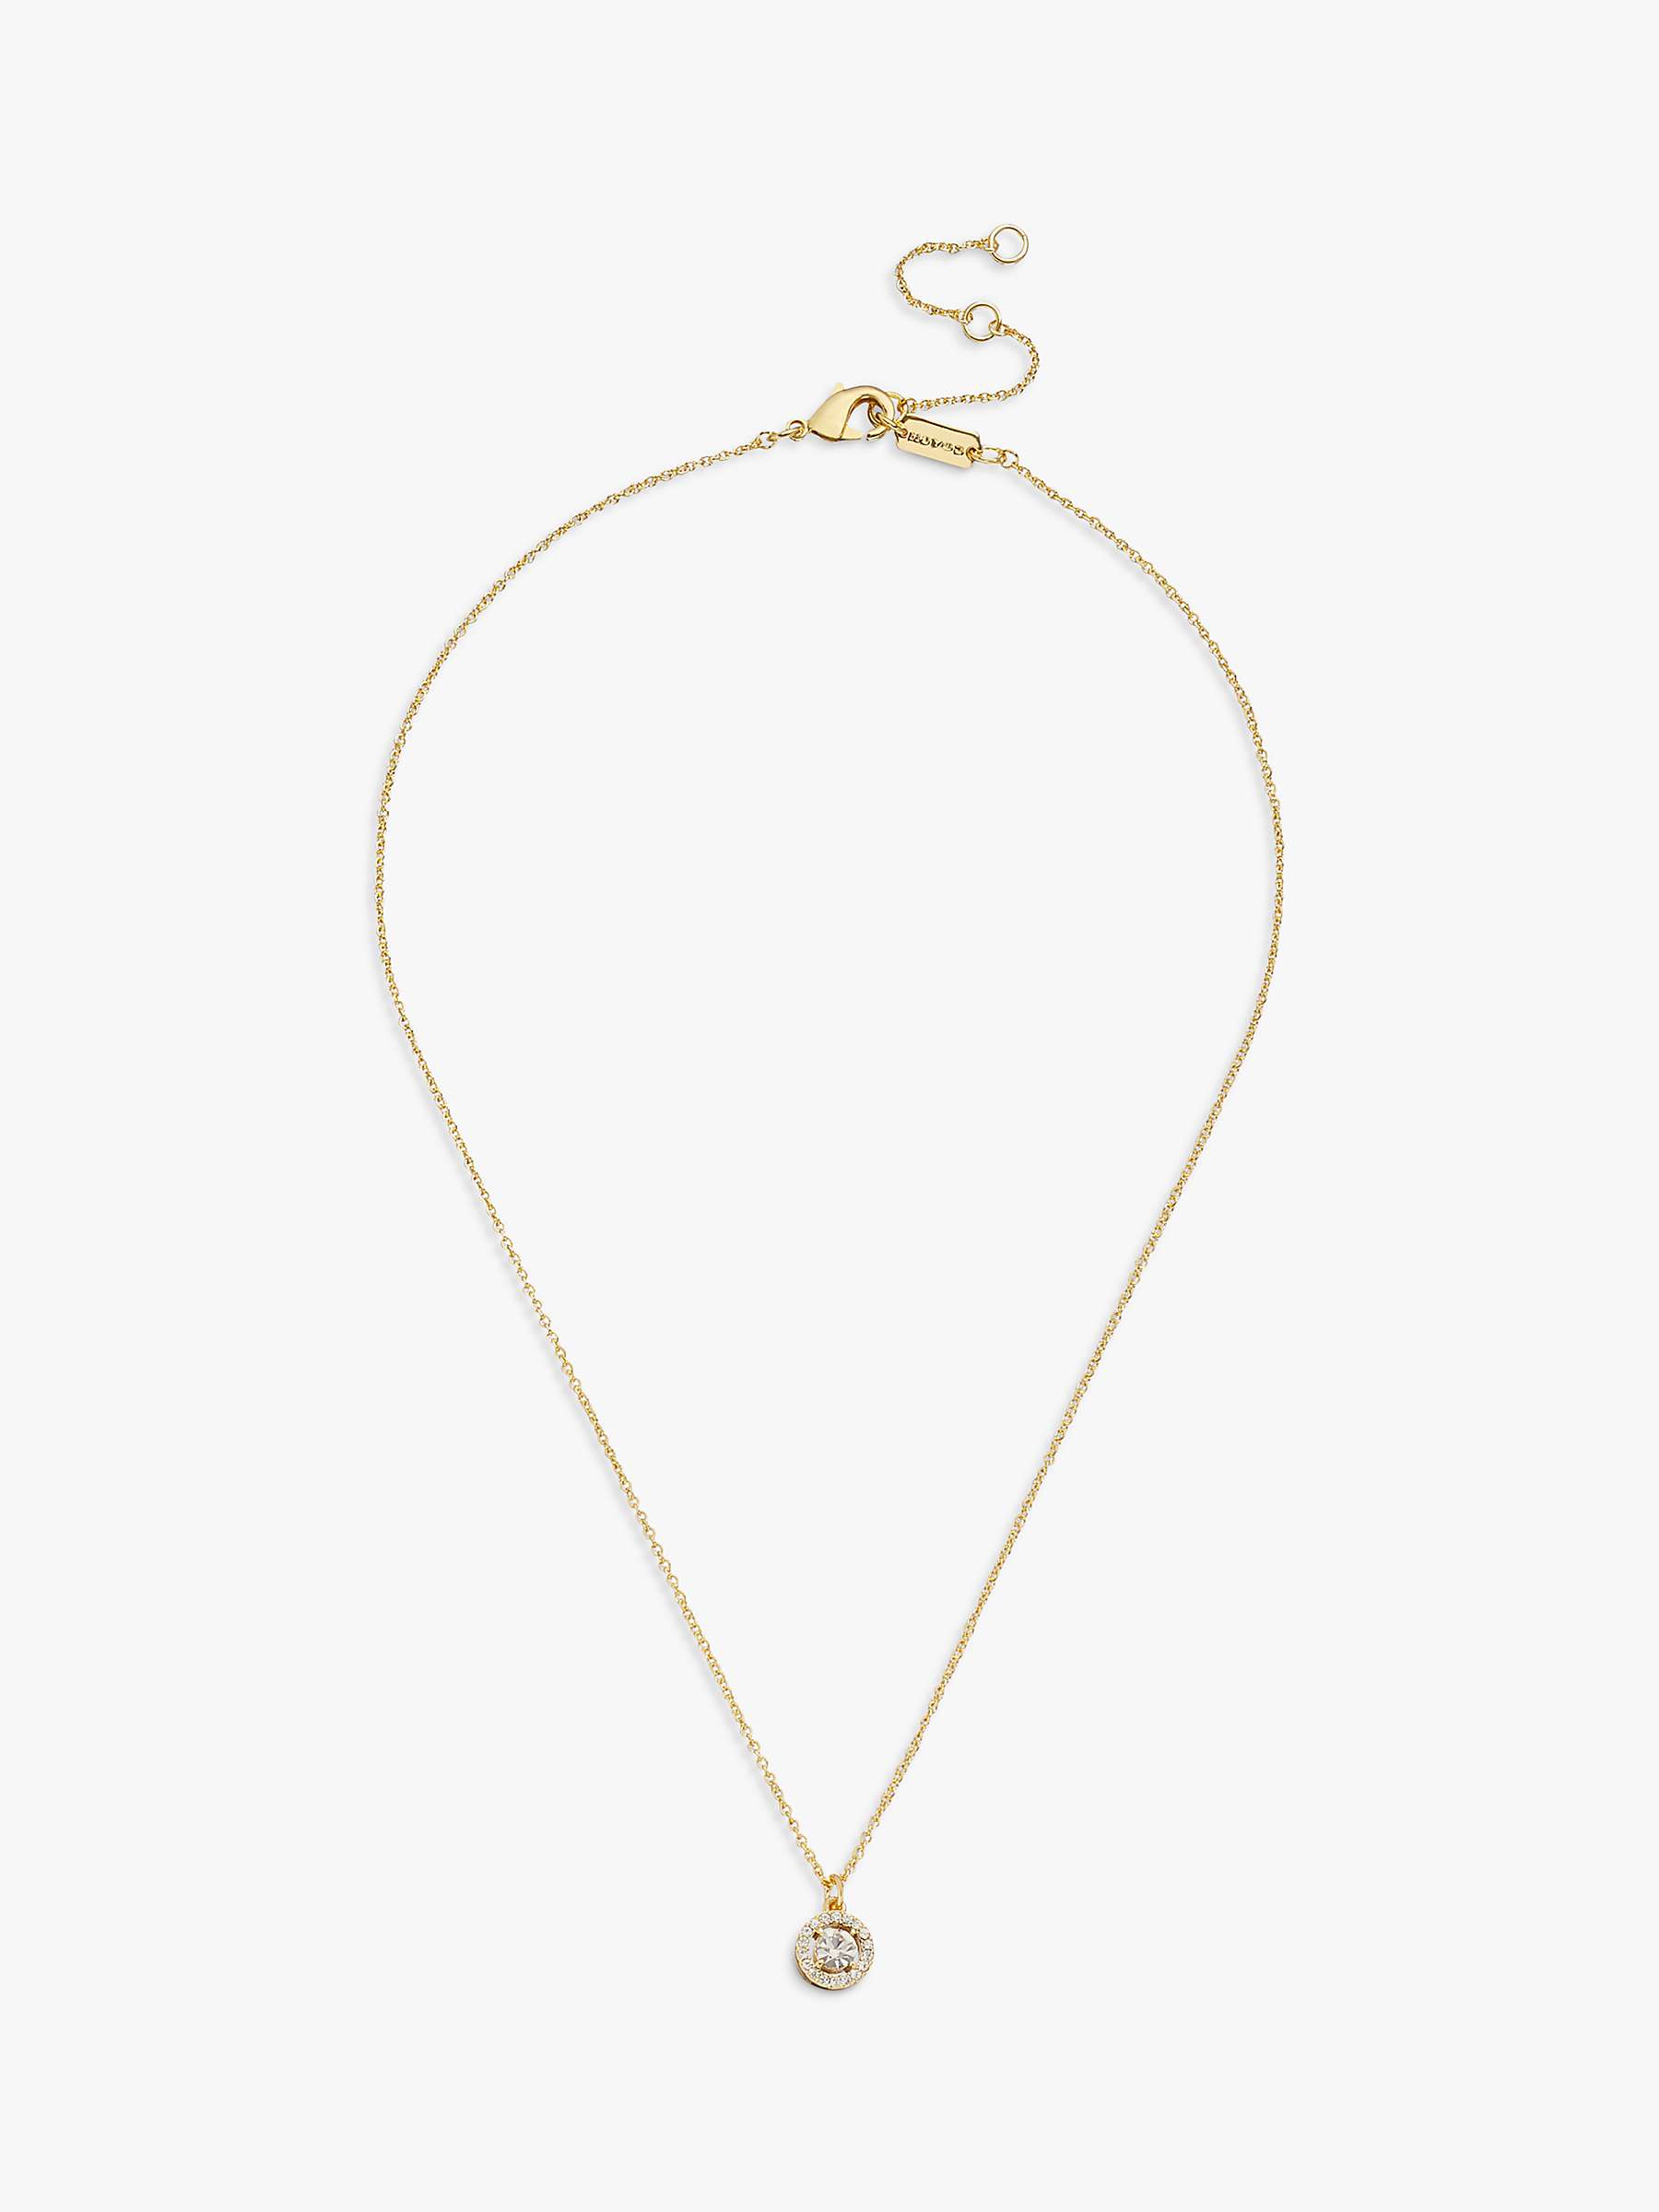 Buy Coach Crystal Halo Pave Pendant Necklace, Gold Online at johnlewis.com